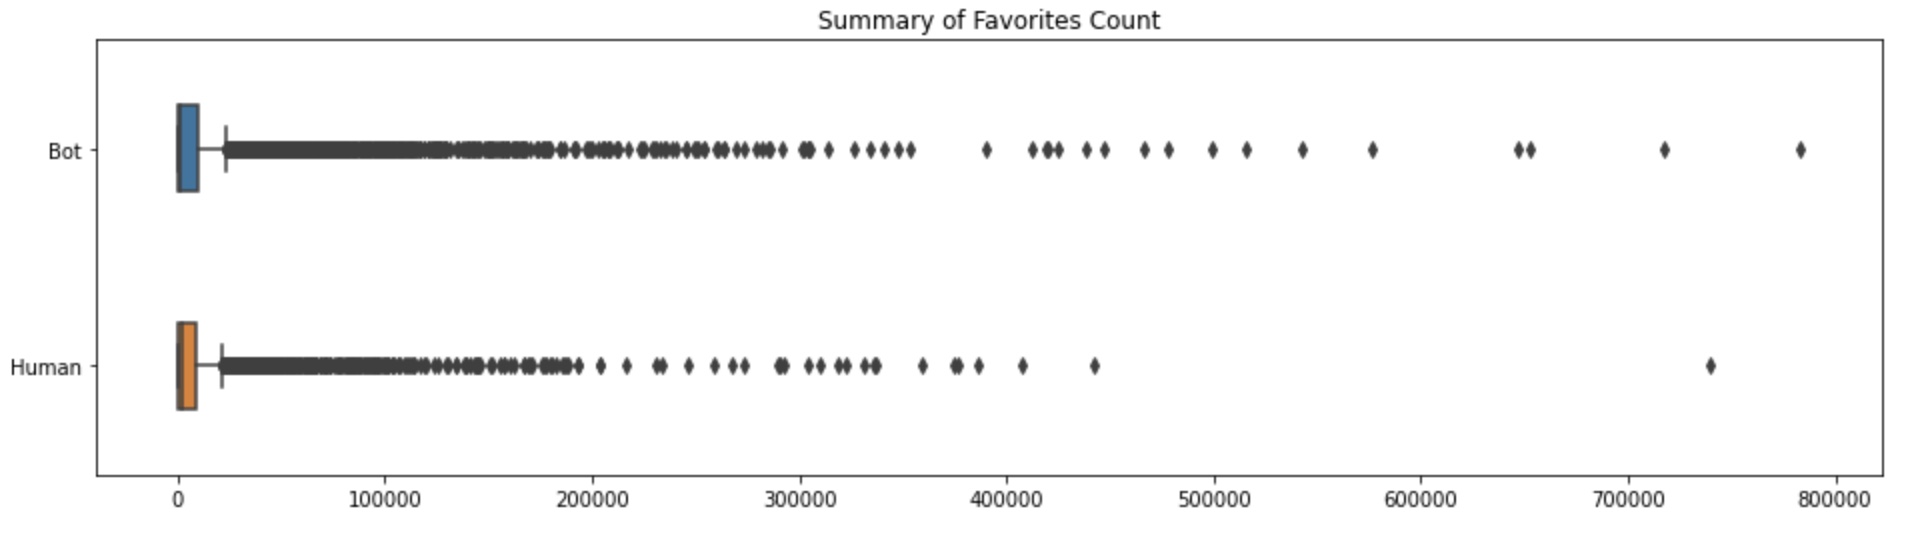 Summary of Favorites Count